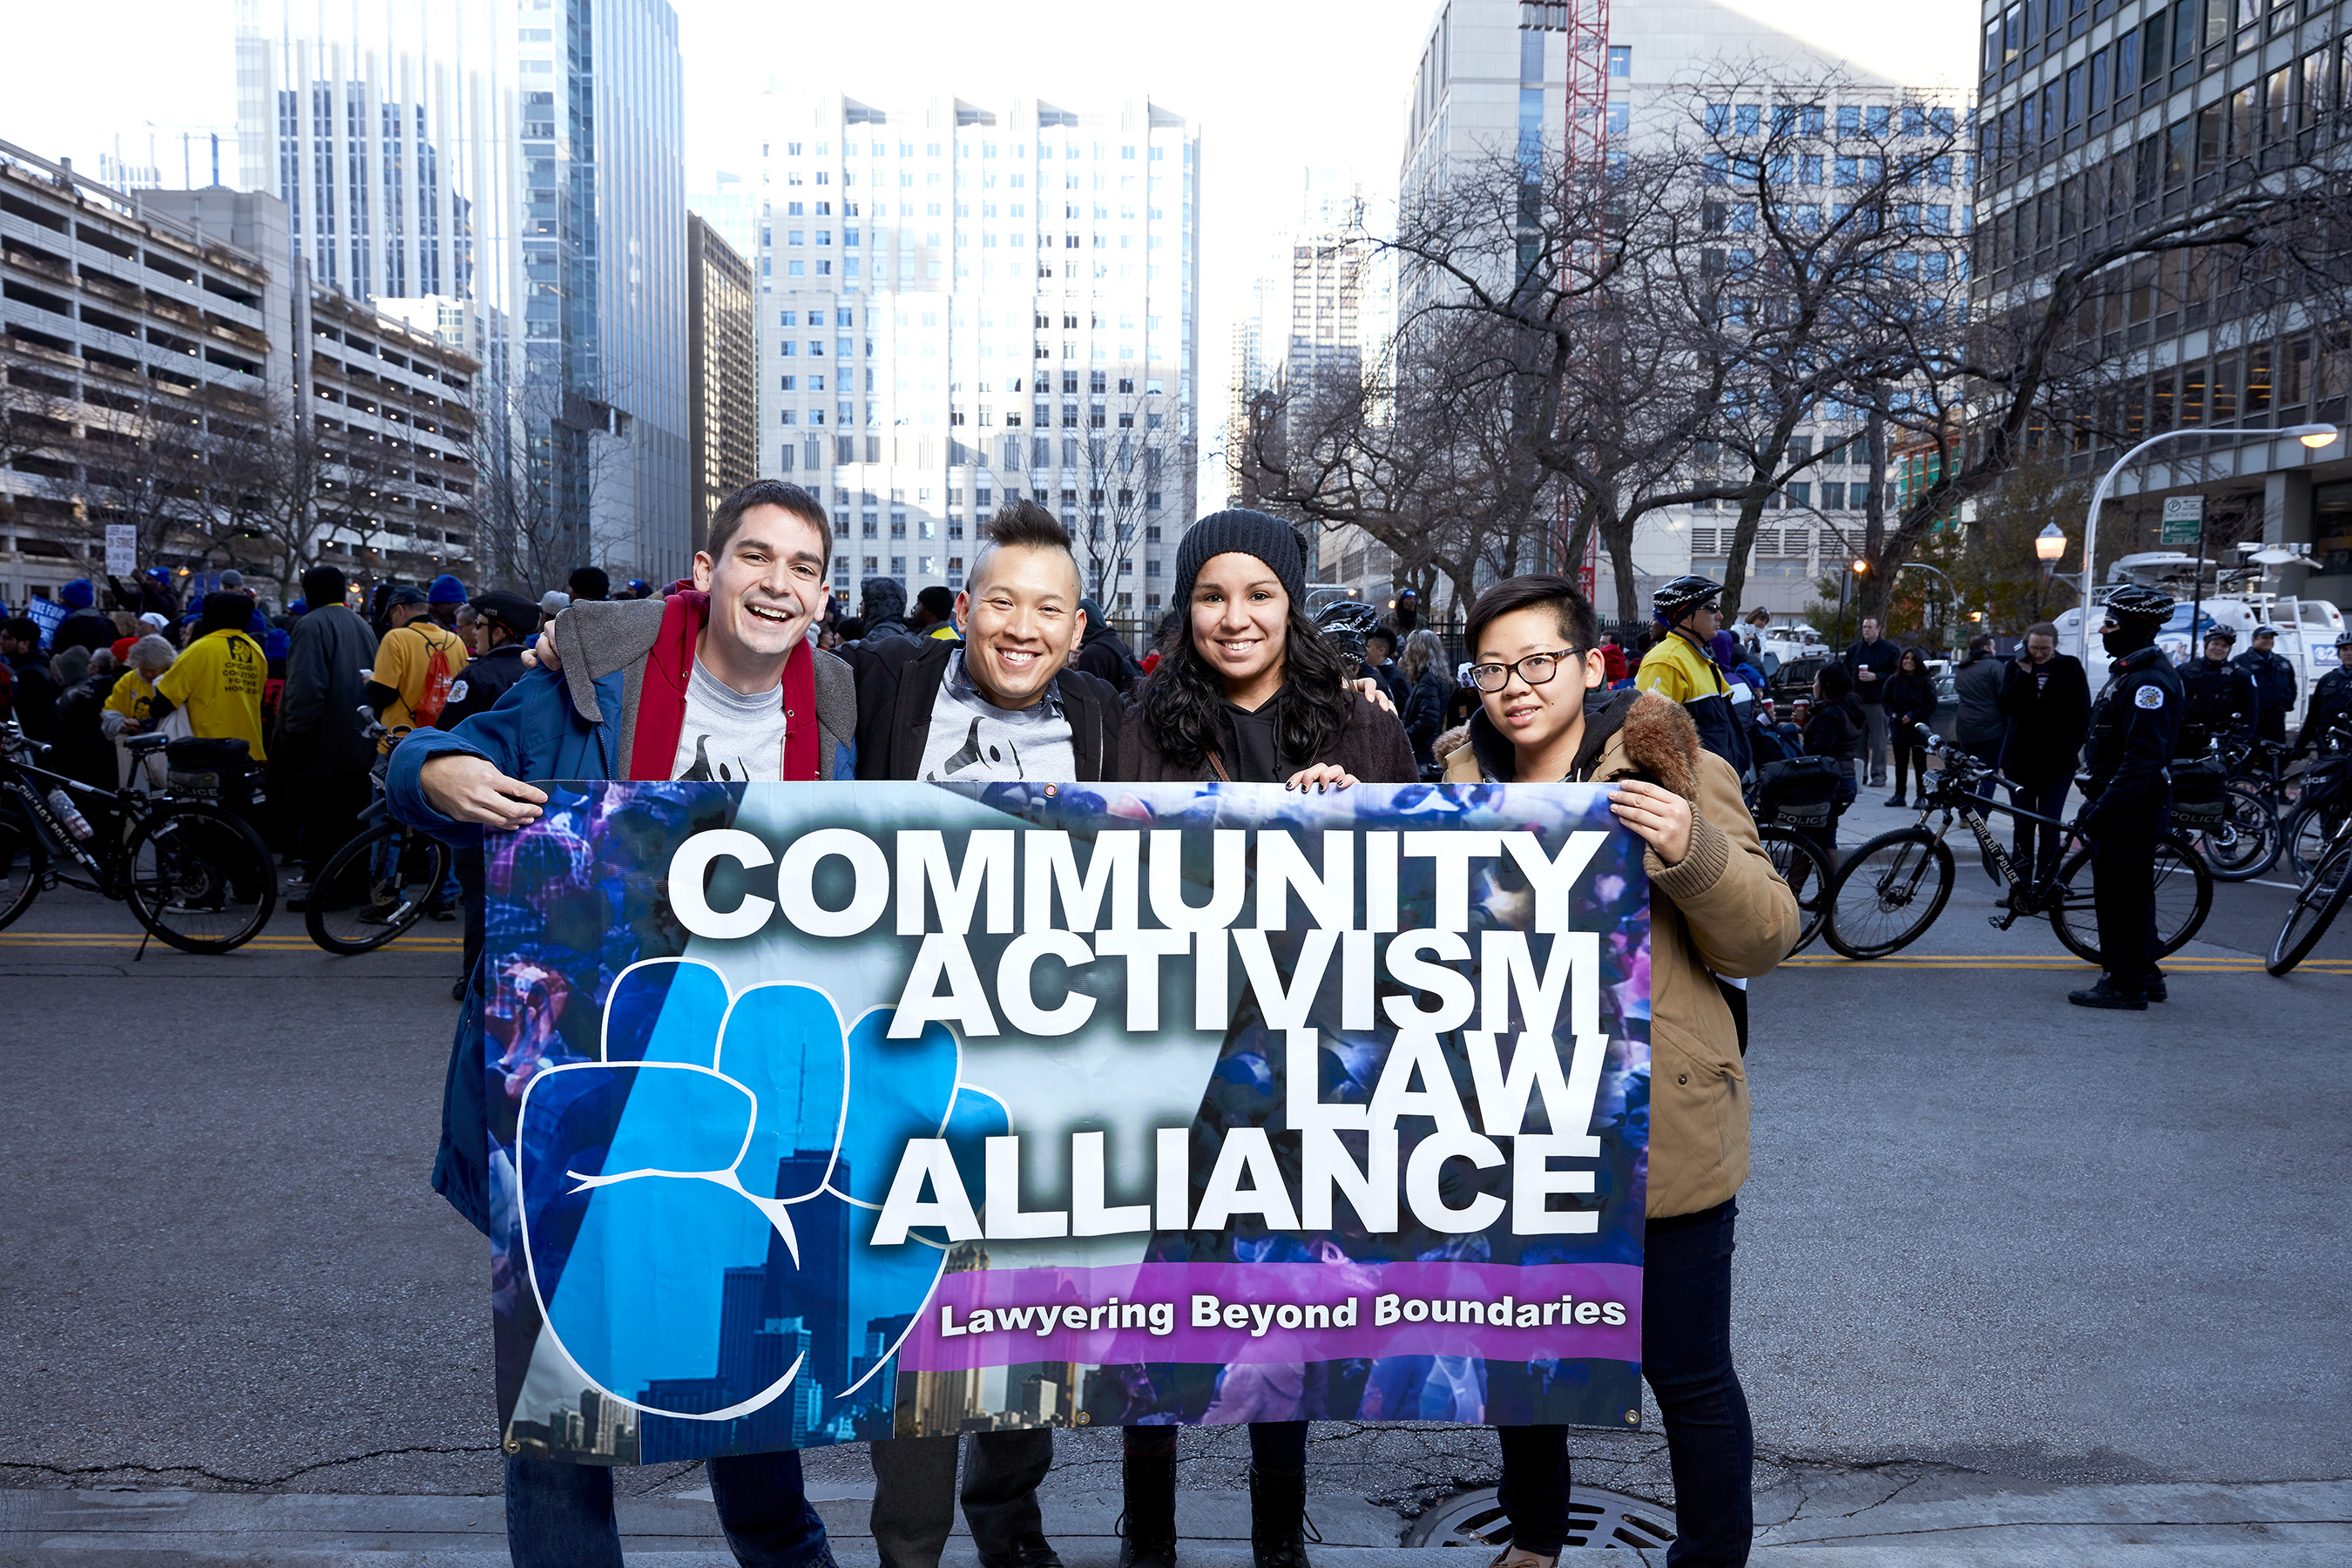 KIND People Winner and founder of Community Activism Law Alliance, Lam Ho, with his team on the streets of Chicago